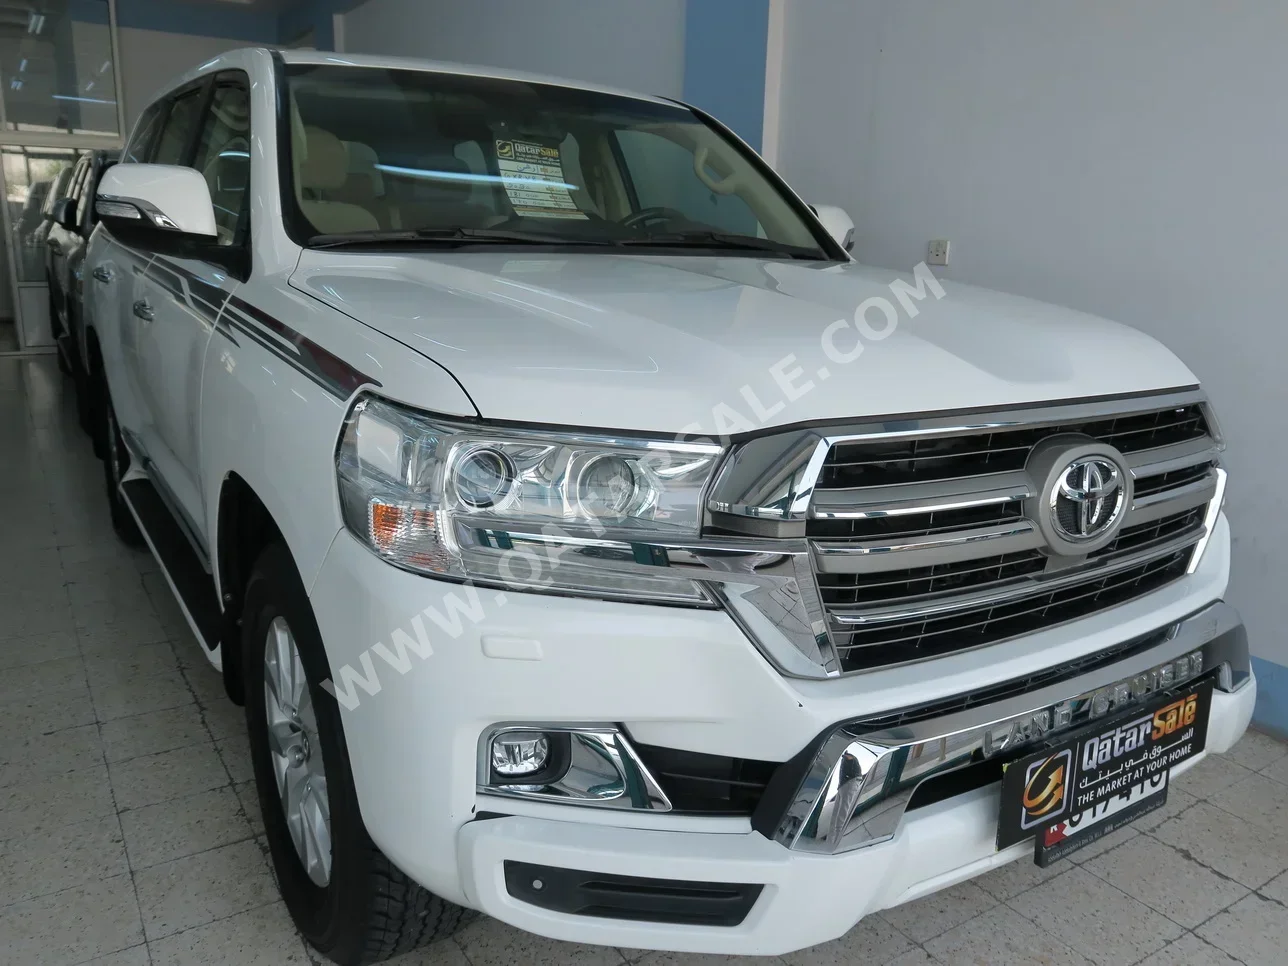  Toyota  Land Cruiser  GXR  2020  Automatic  181,000 Km  8 Cylinder  Four Wheel Drive (4WD)  SUV  White  With Warranty